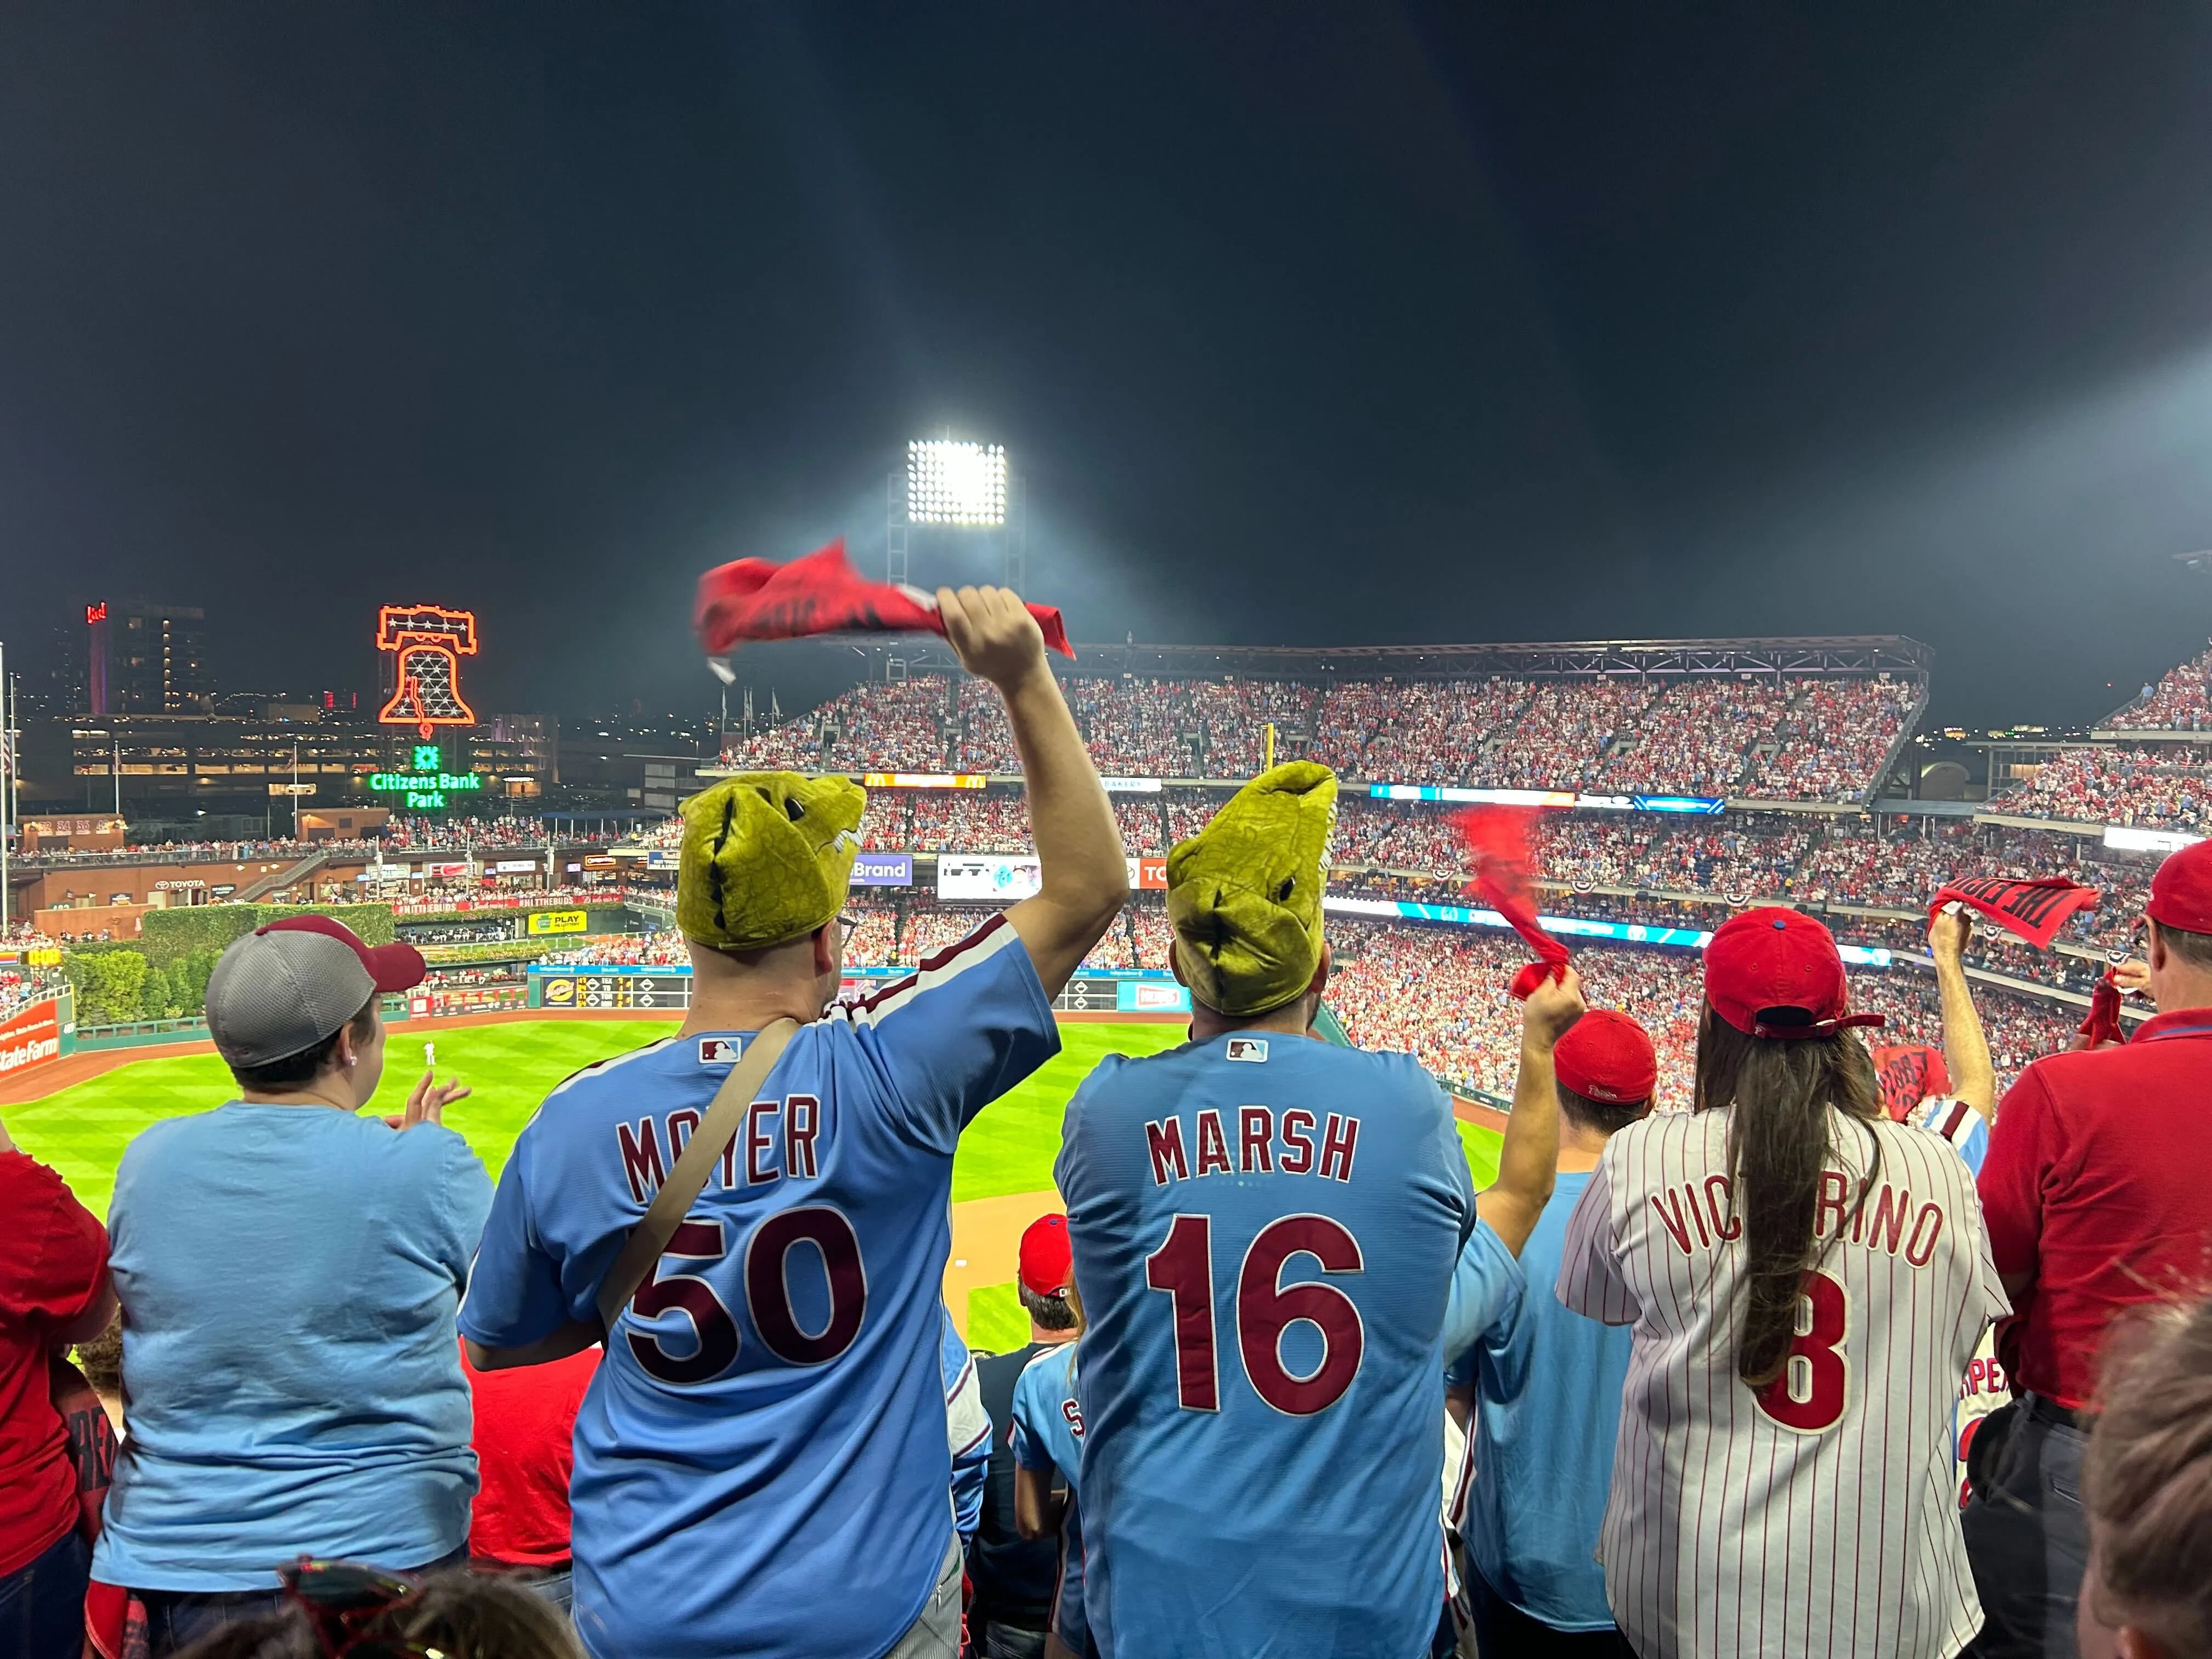 When is the World Series? Schedule, TV info & teams for Phillies fans